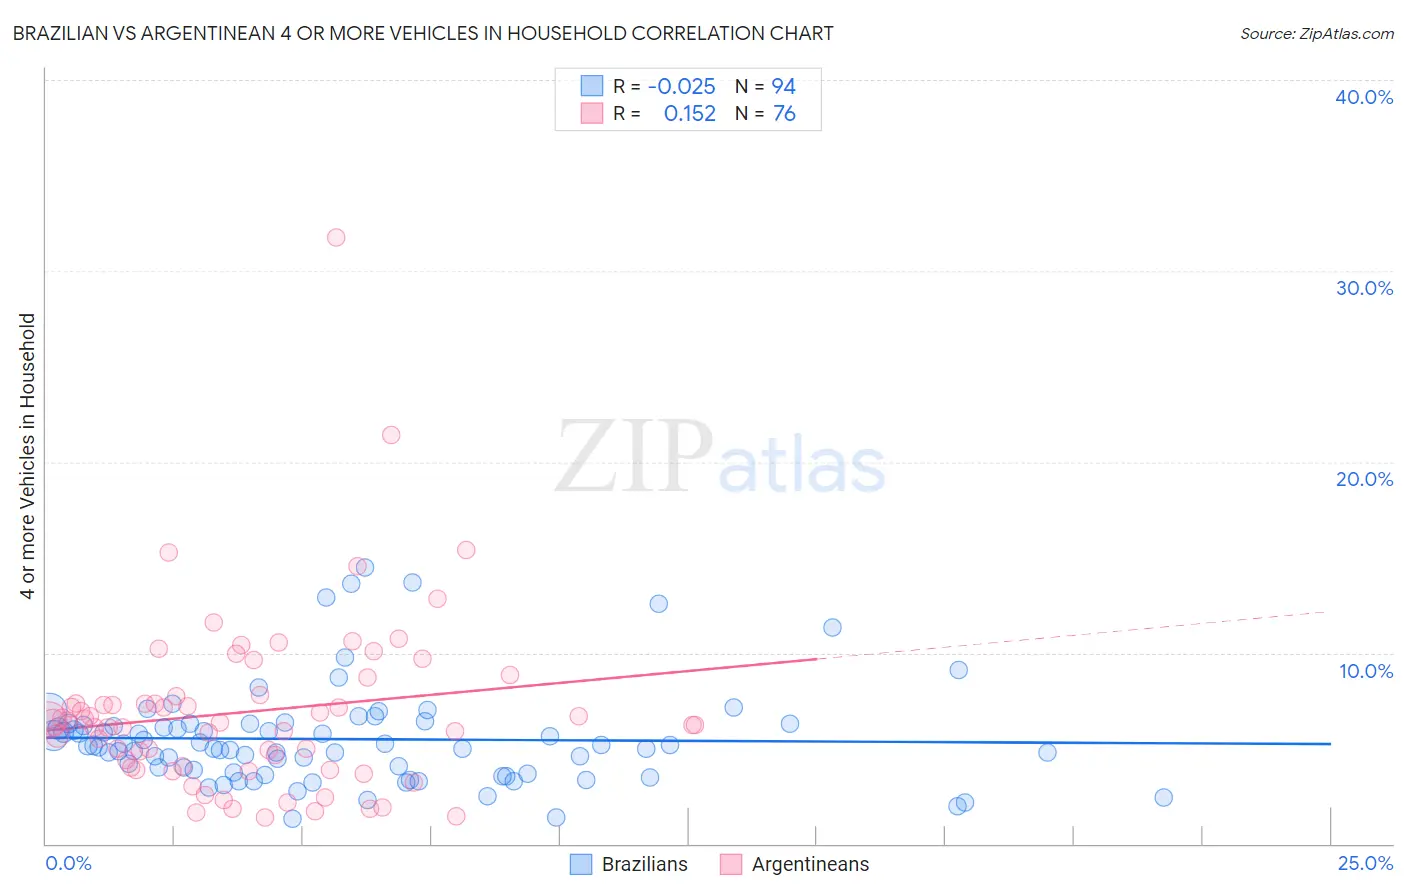 Brazilian vs Argentinean 4 or more Vehicles in Household